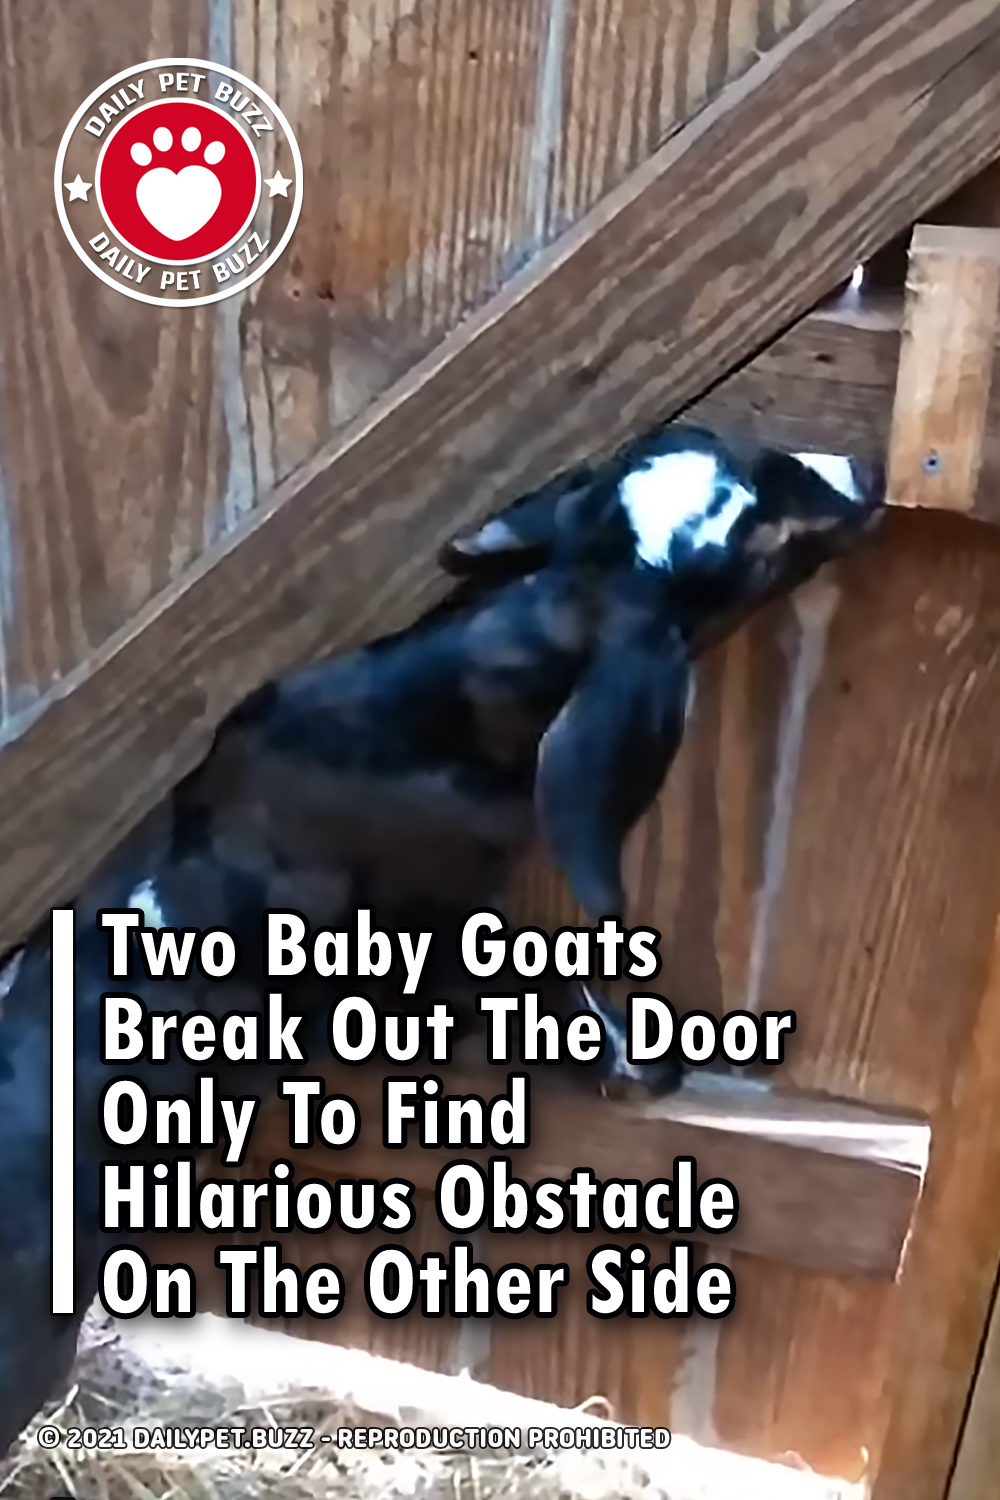 Two Baby Goats Break Out The Door Only To Find Hilarious Obstacle On The Other Side